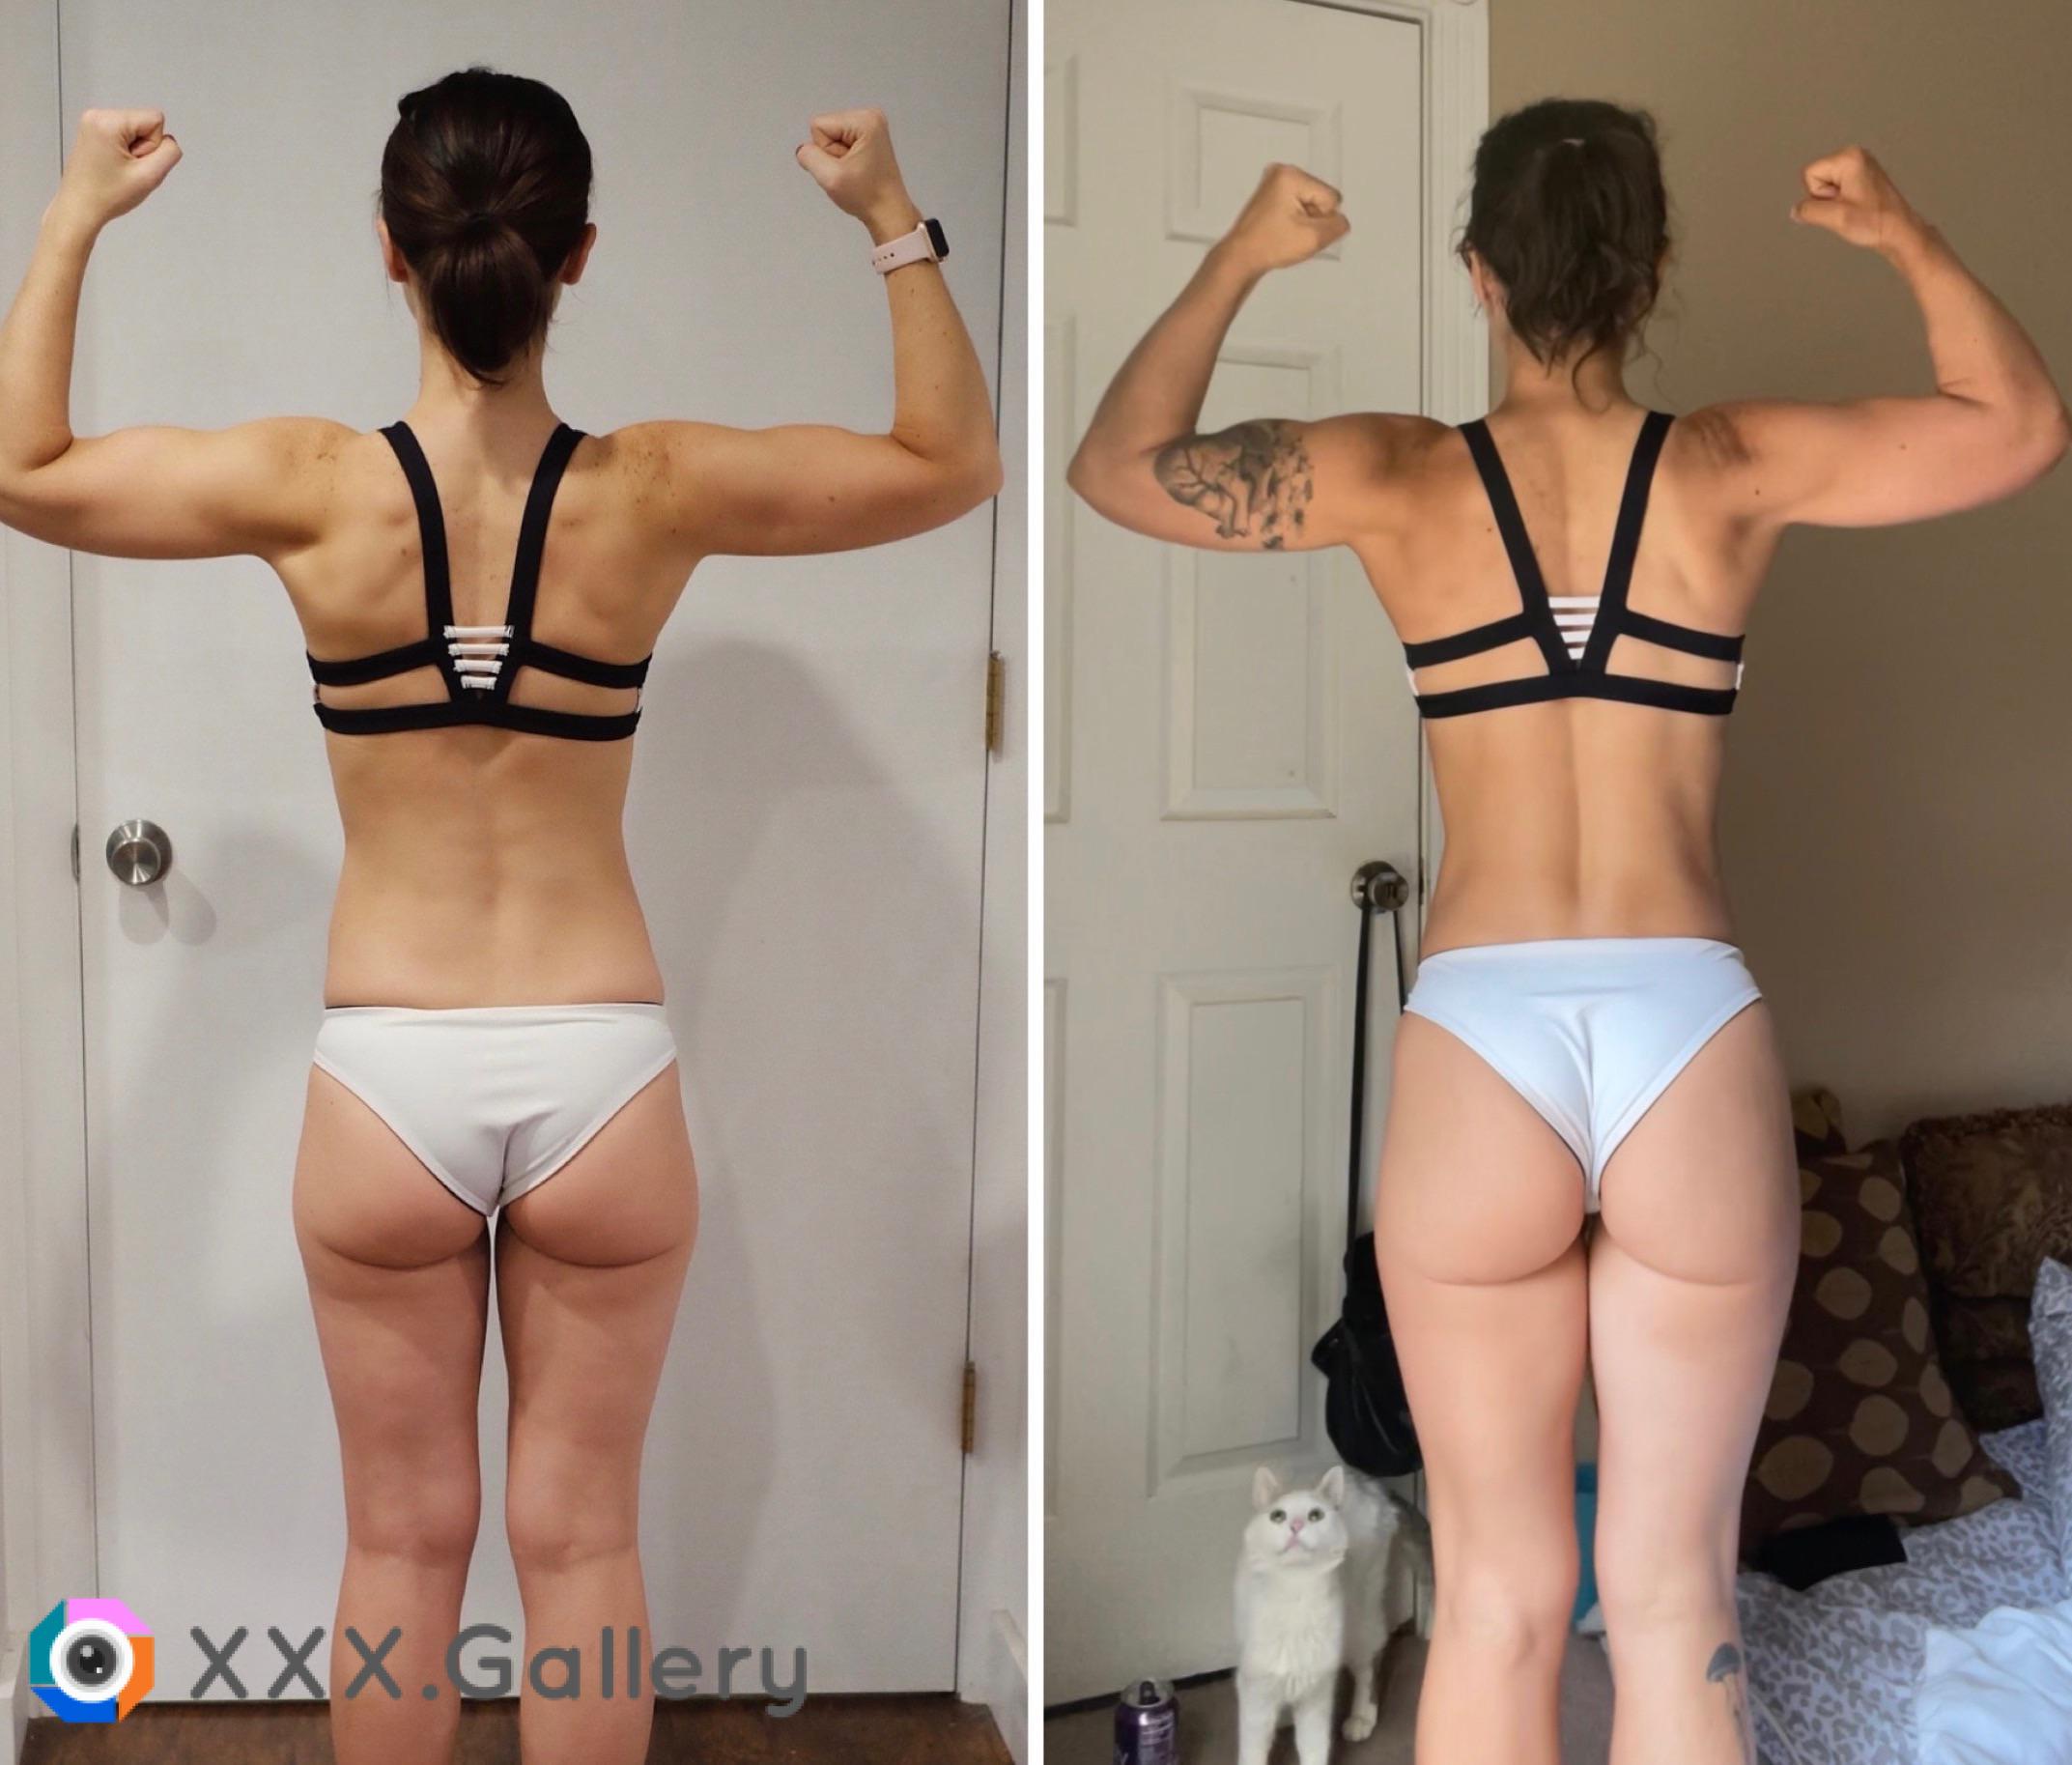 Figured Id share the backside progress too Body recomp is